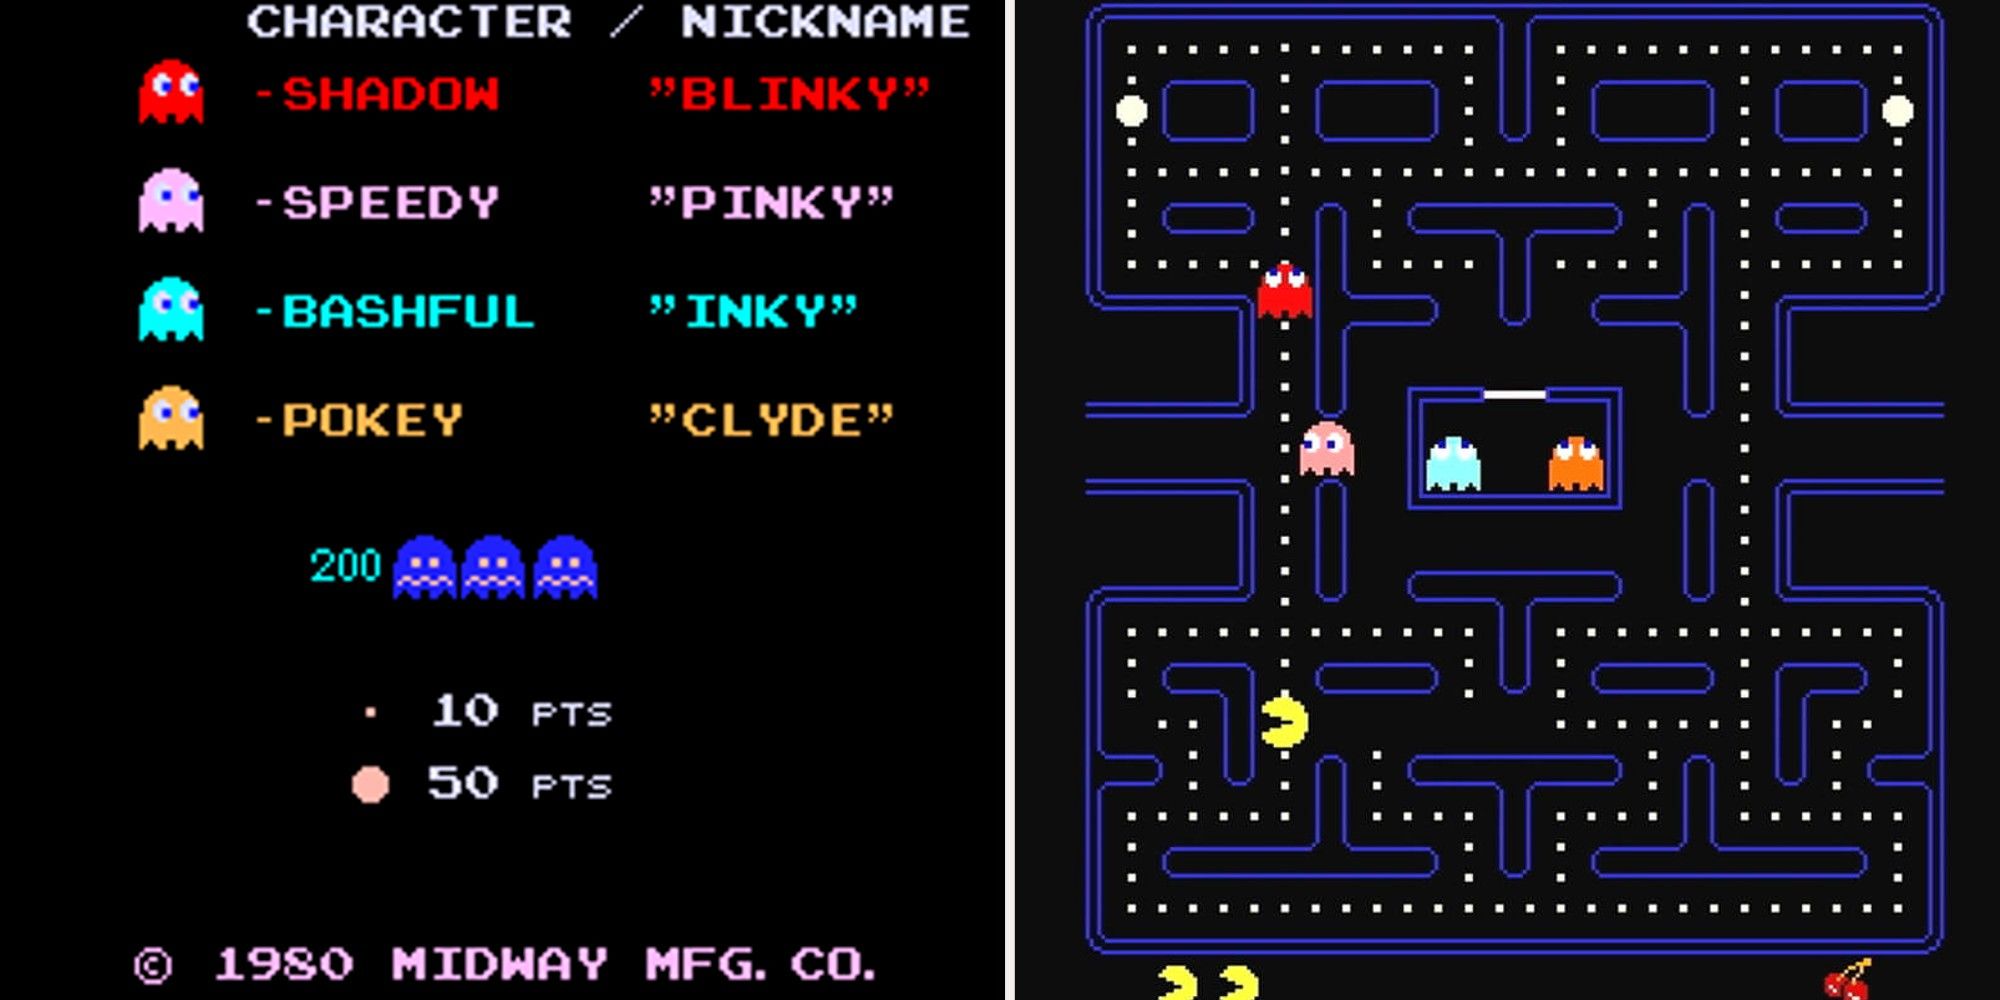 Pac-man - Inky, Blinky, Pinky, and Clyde